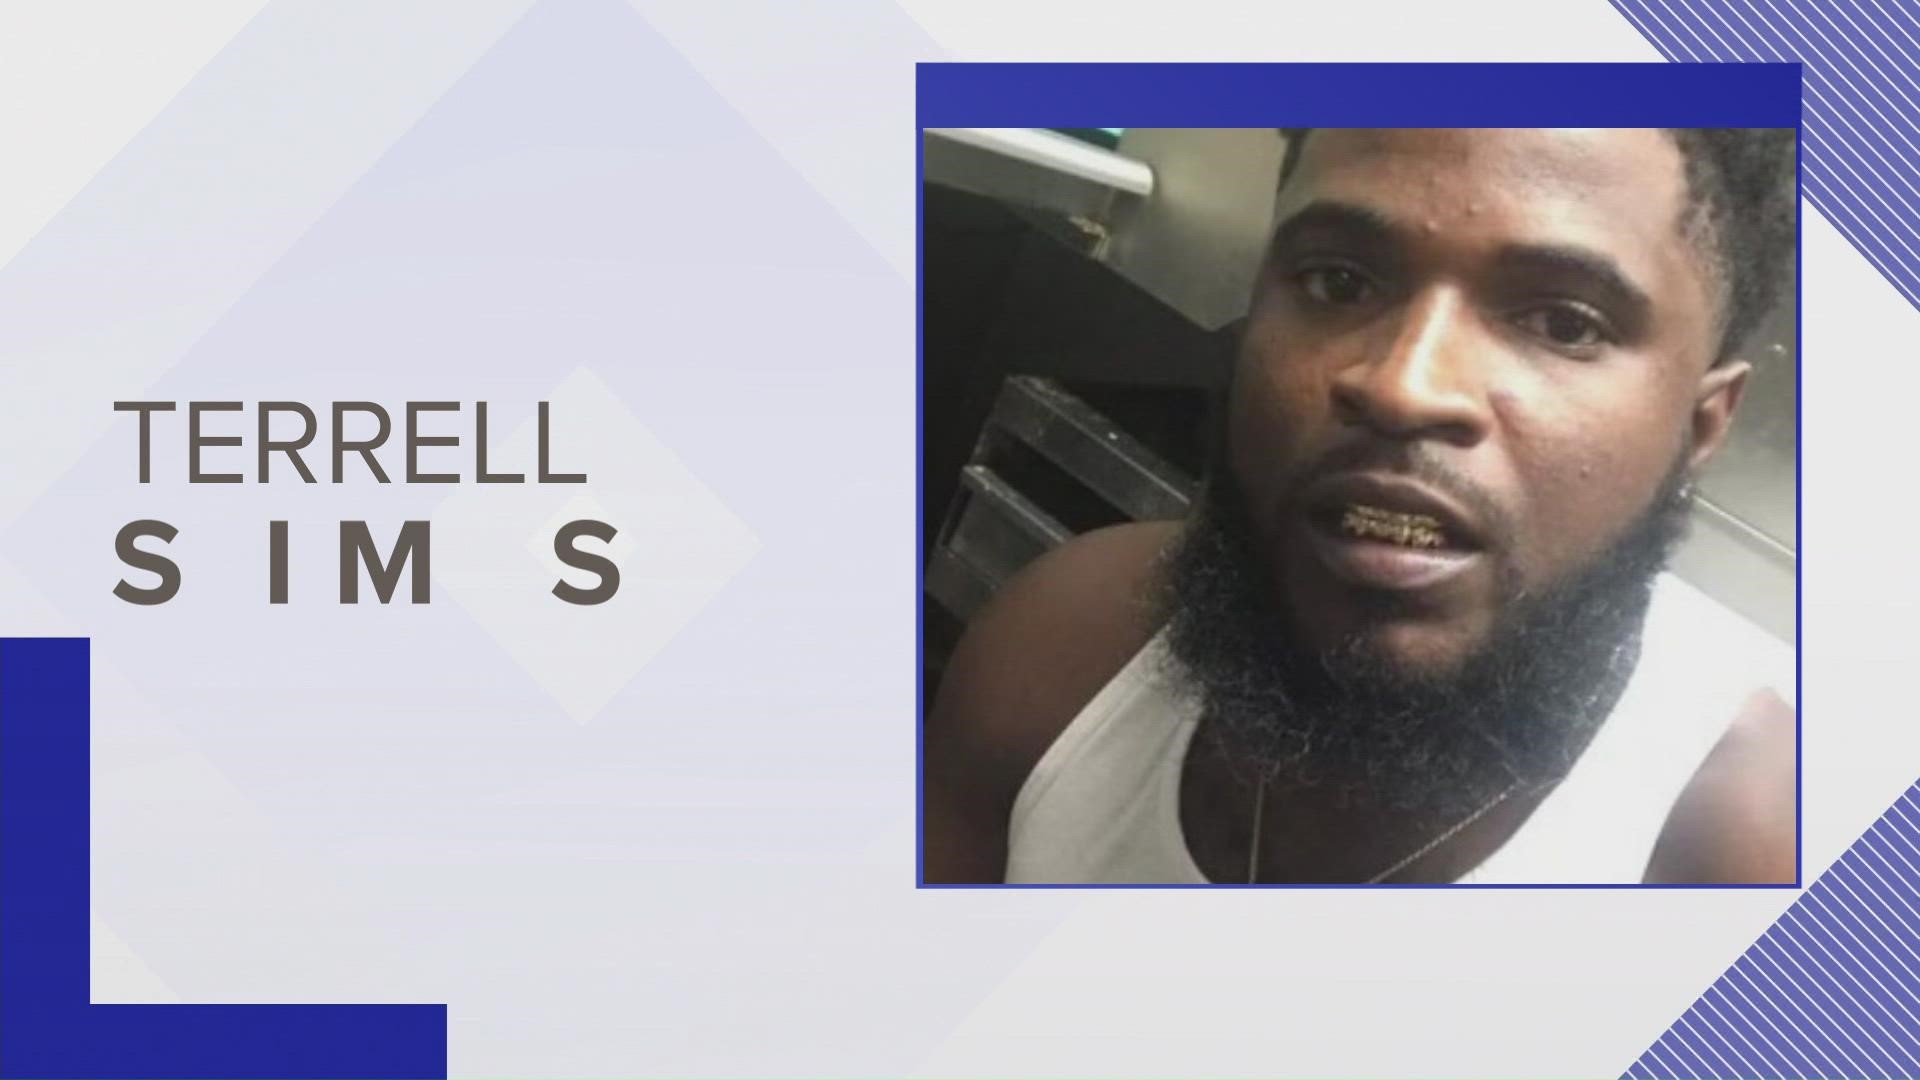 A 30-year-old man has been charged with accessory after the fact in the murder of Terrell Sims.